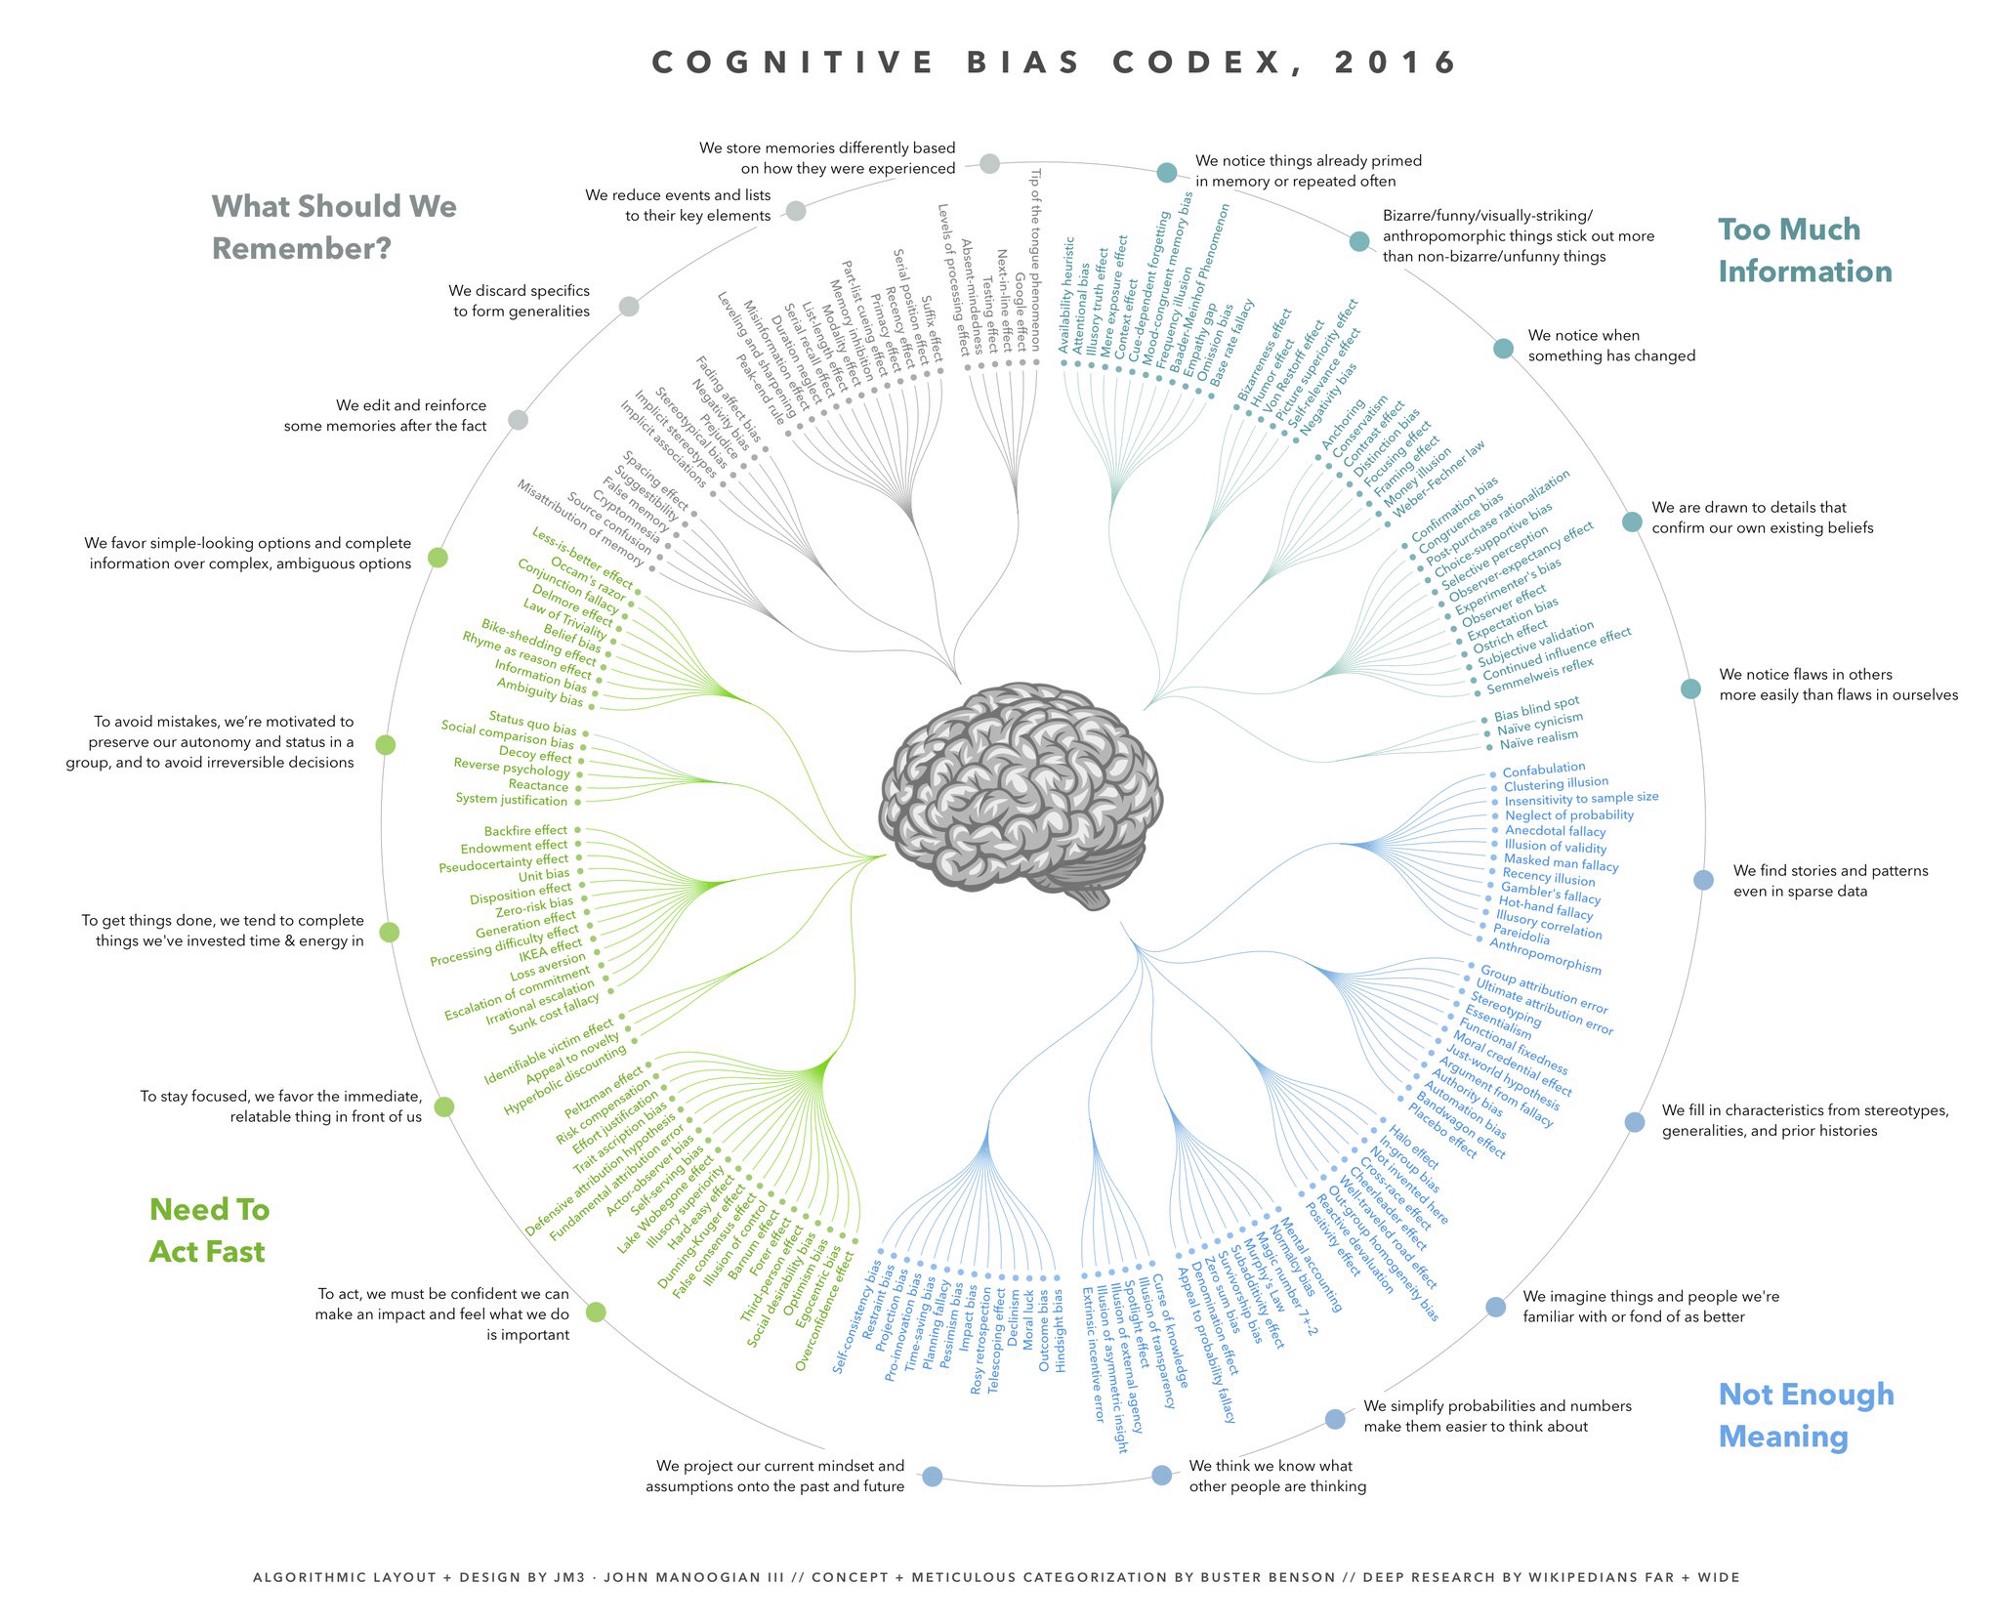 The Cognitive Bias Codex from 2016